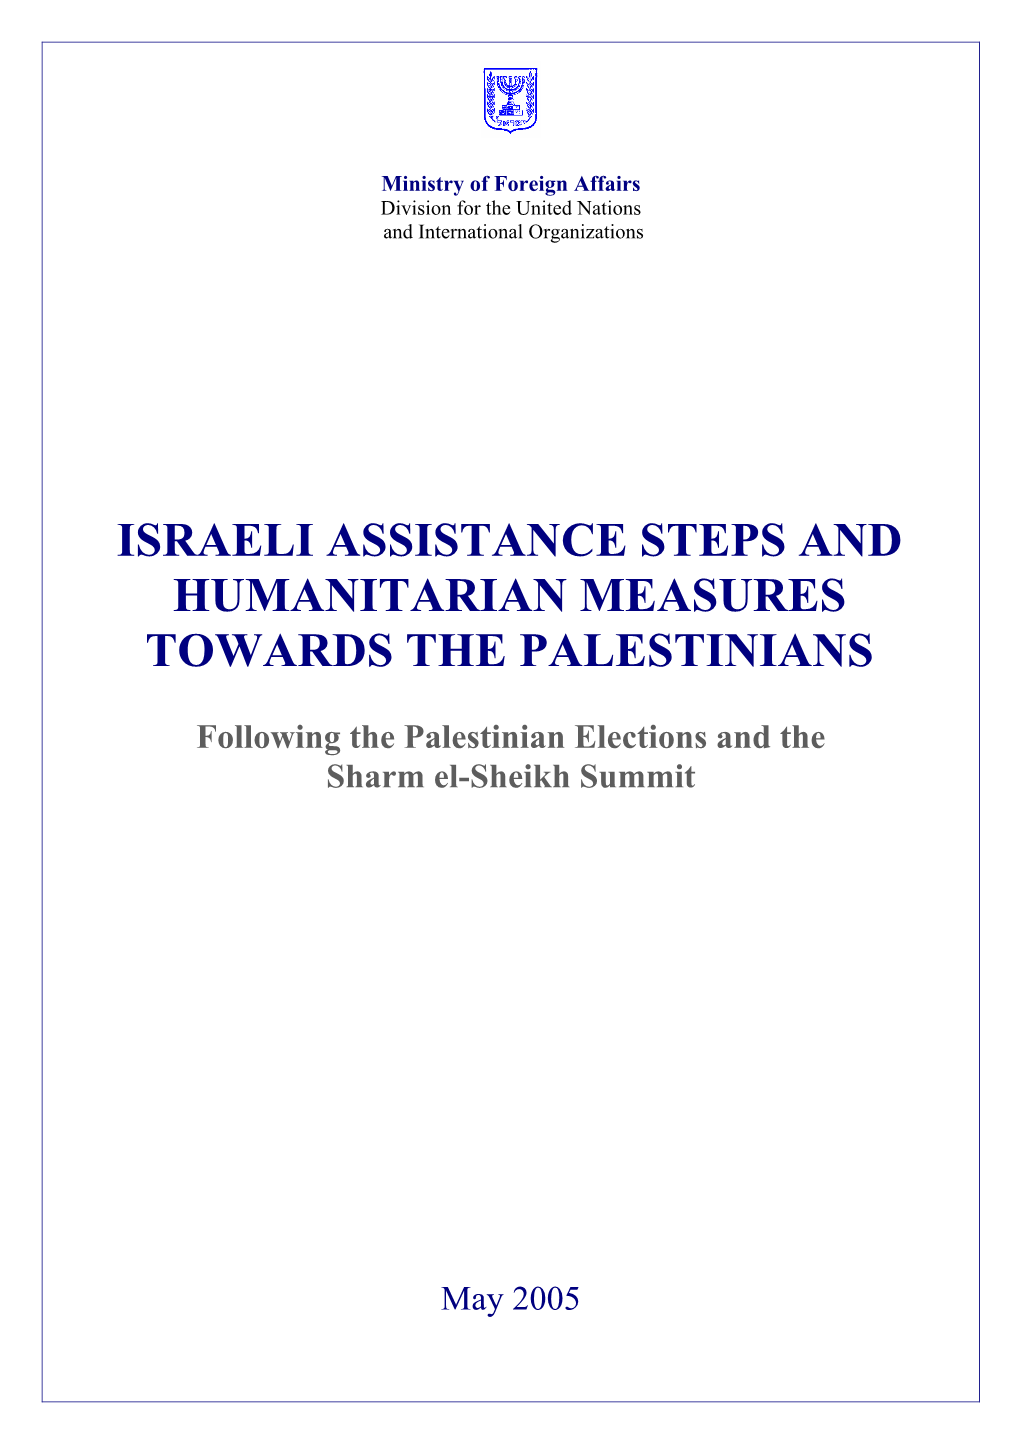 Israeli Assistance Steps and Humanitarian Measures Towards the Palestinians